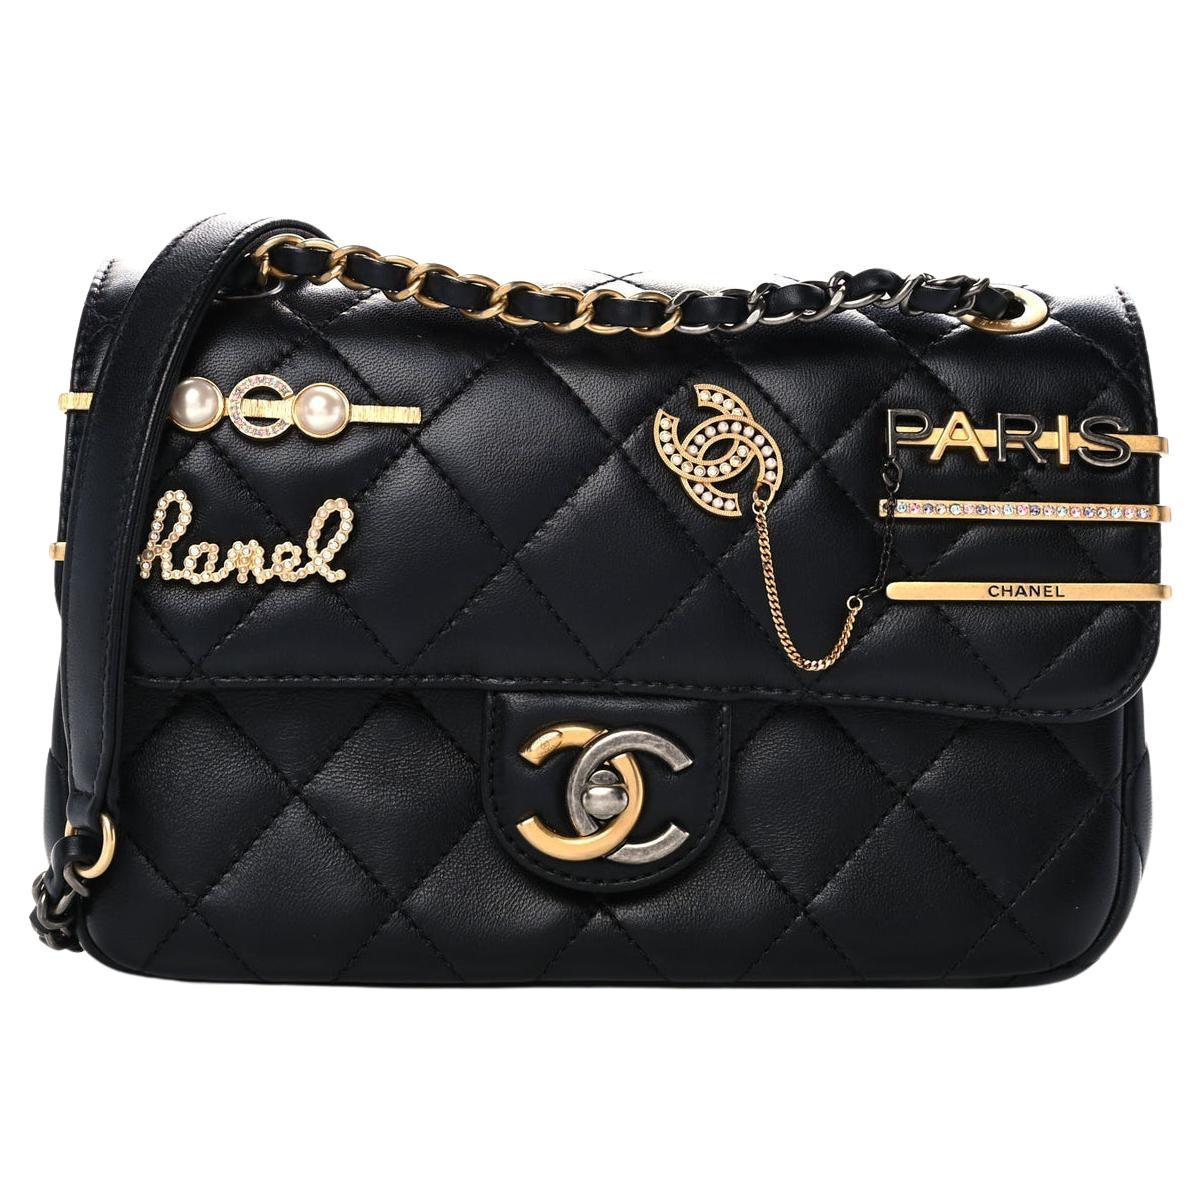 CHANEL Pre-Owned Vintage 1970s Bag - Farfetch